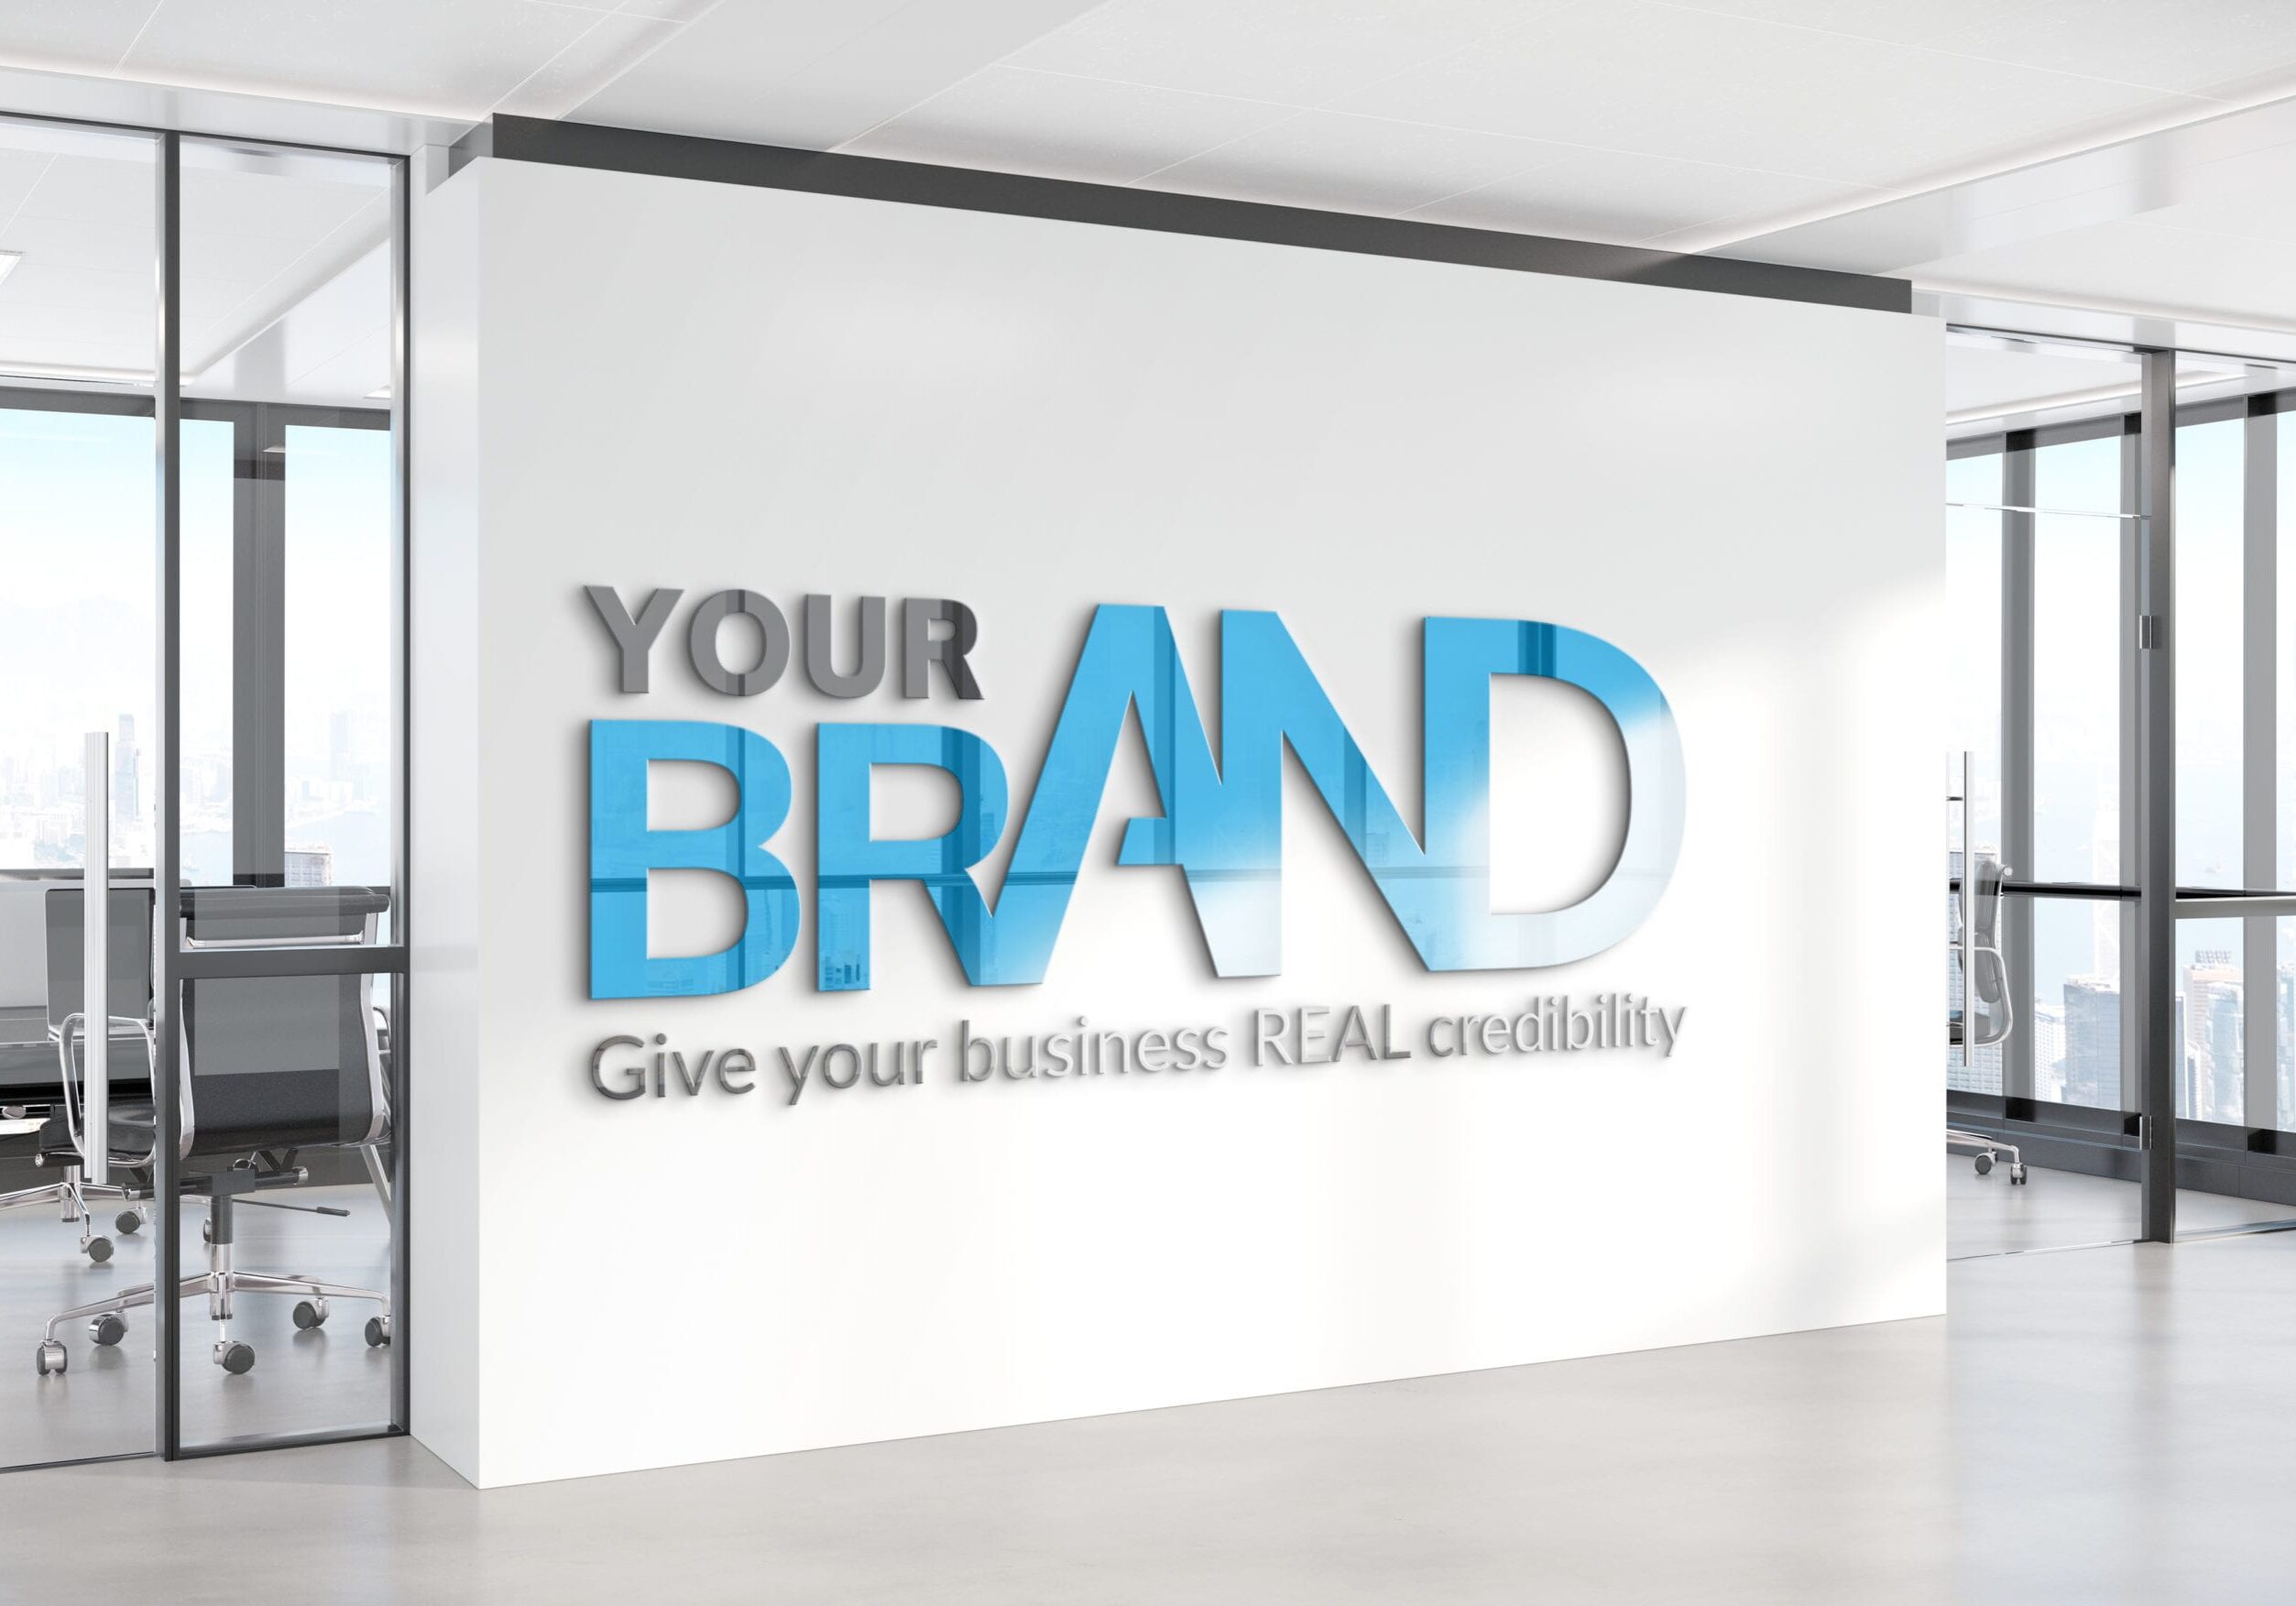 Image of a smart office with lettering on the wall that says "Your brand: Give your business REAL credibility"